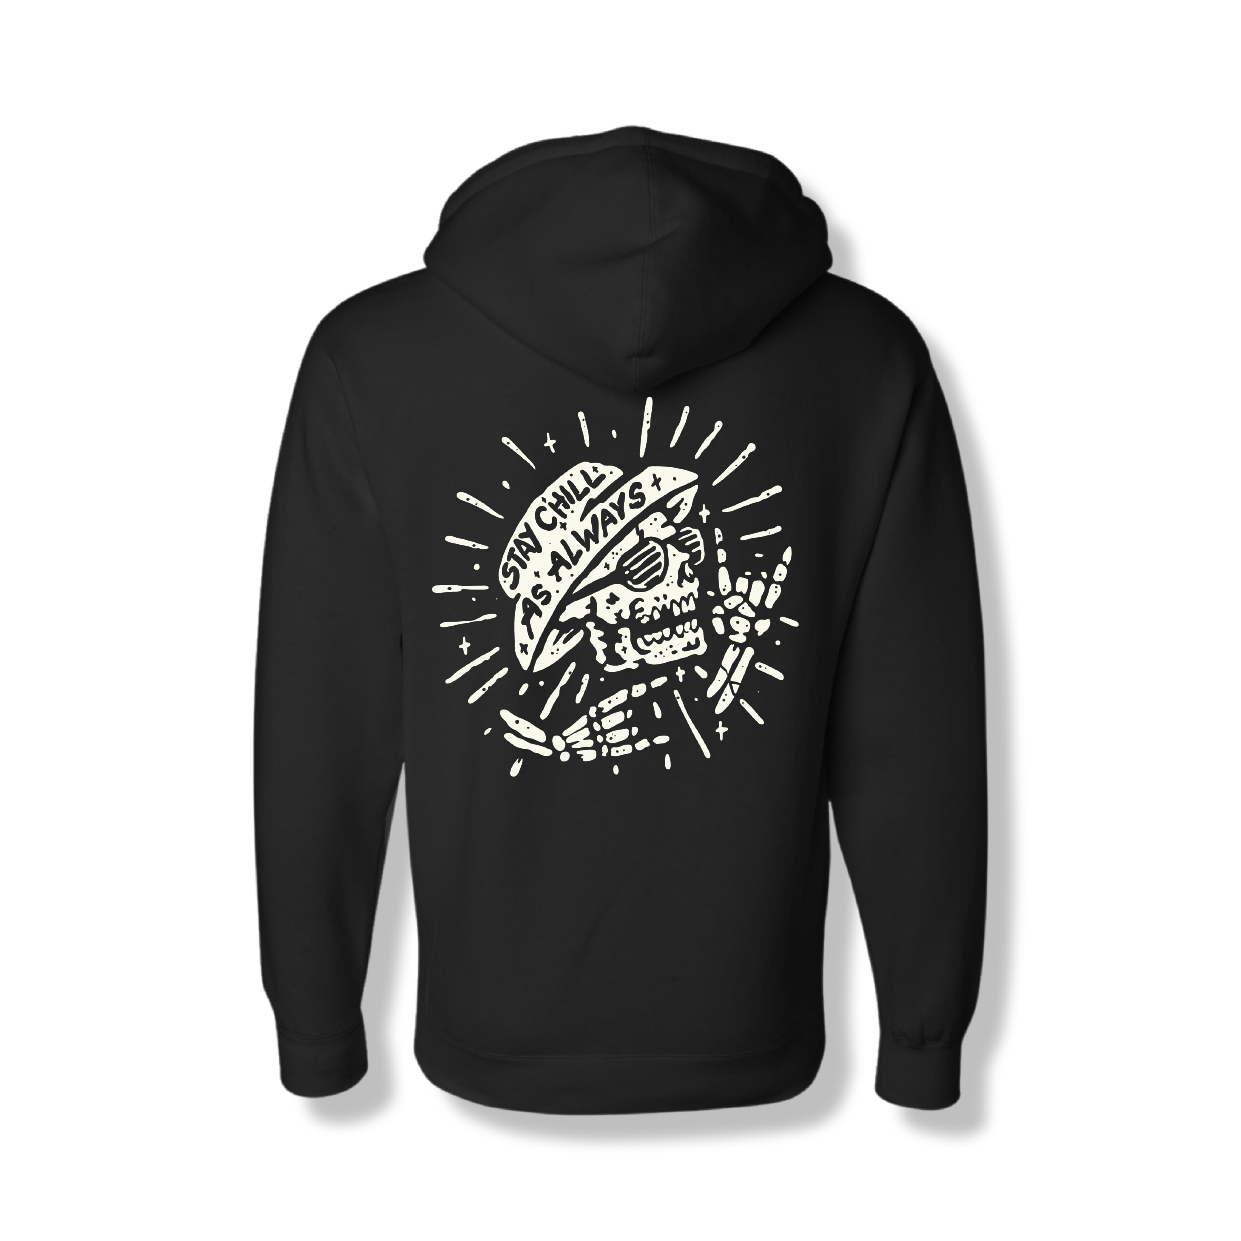 Stay Chill (Standard Hoodie)